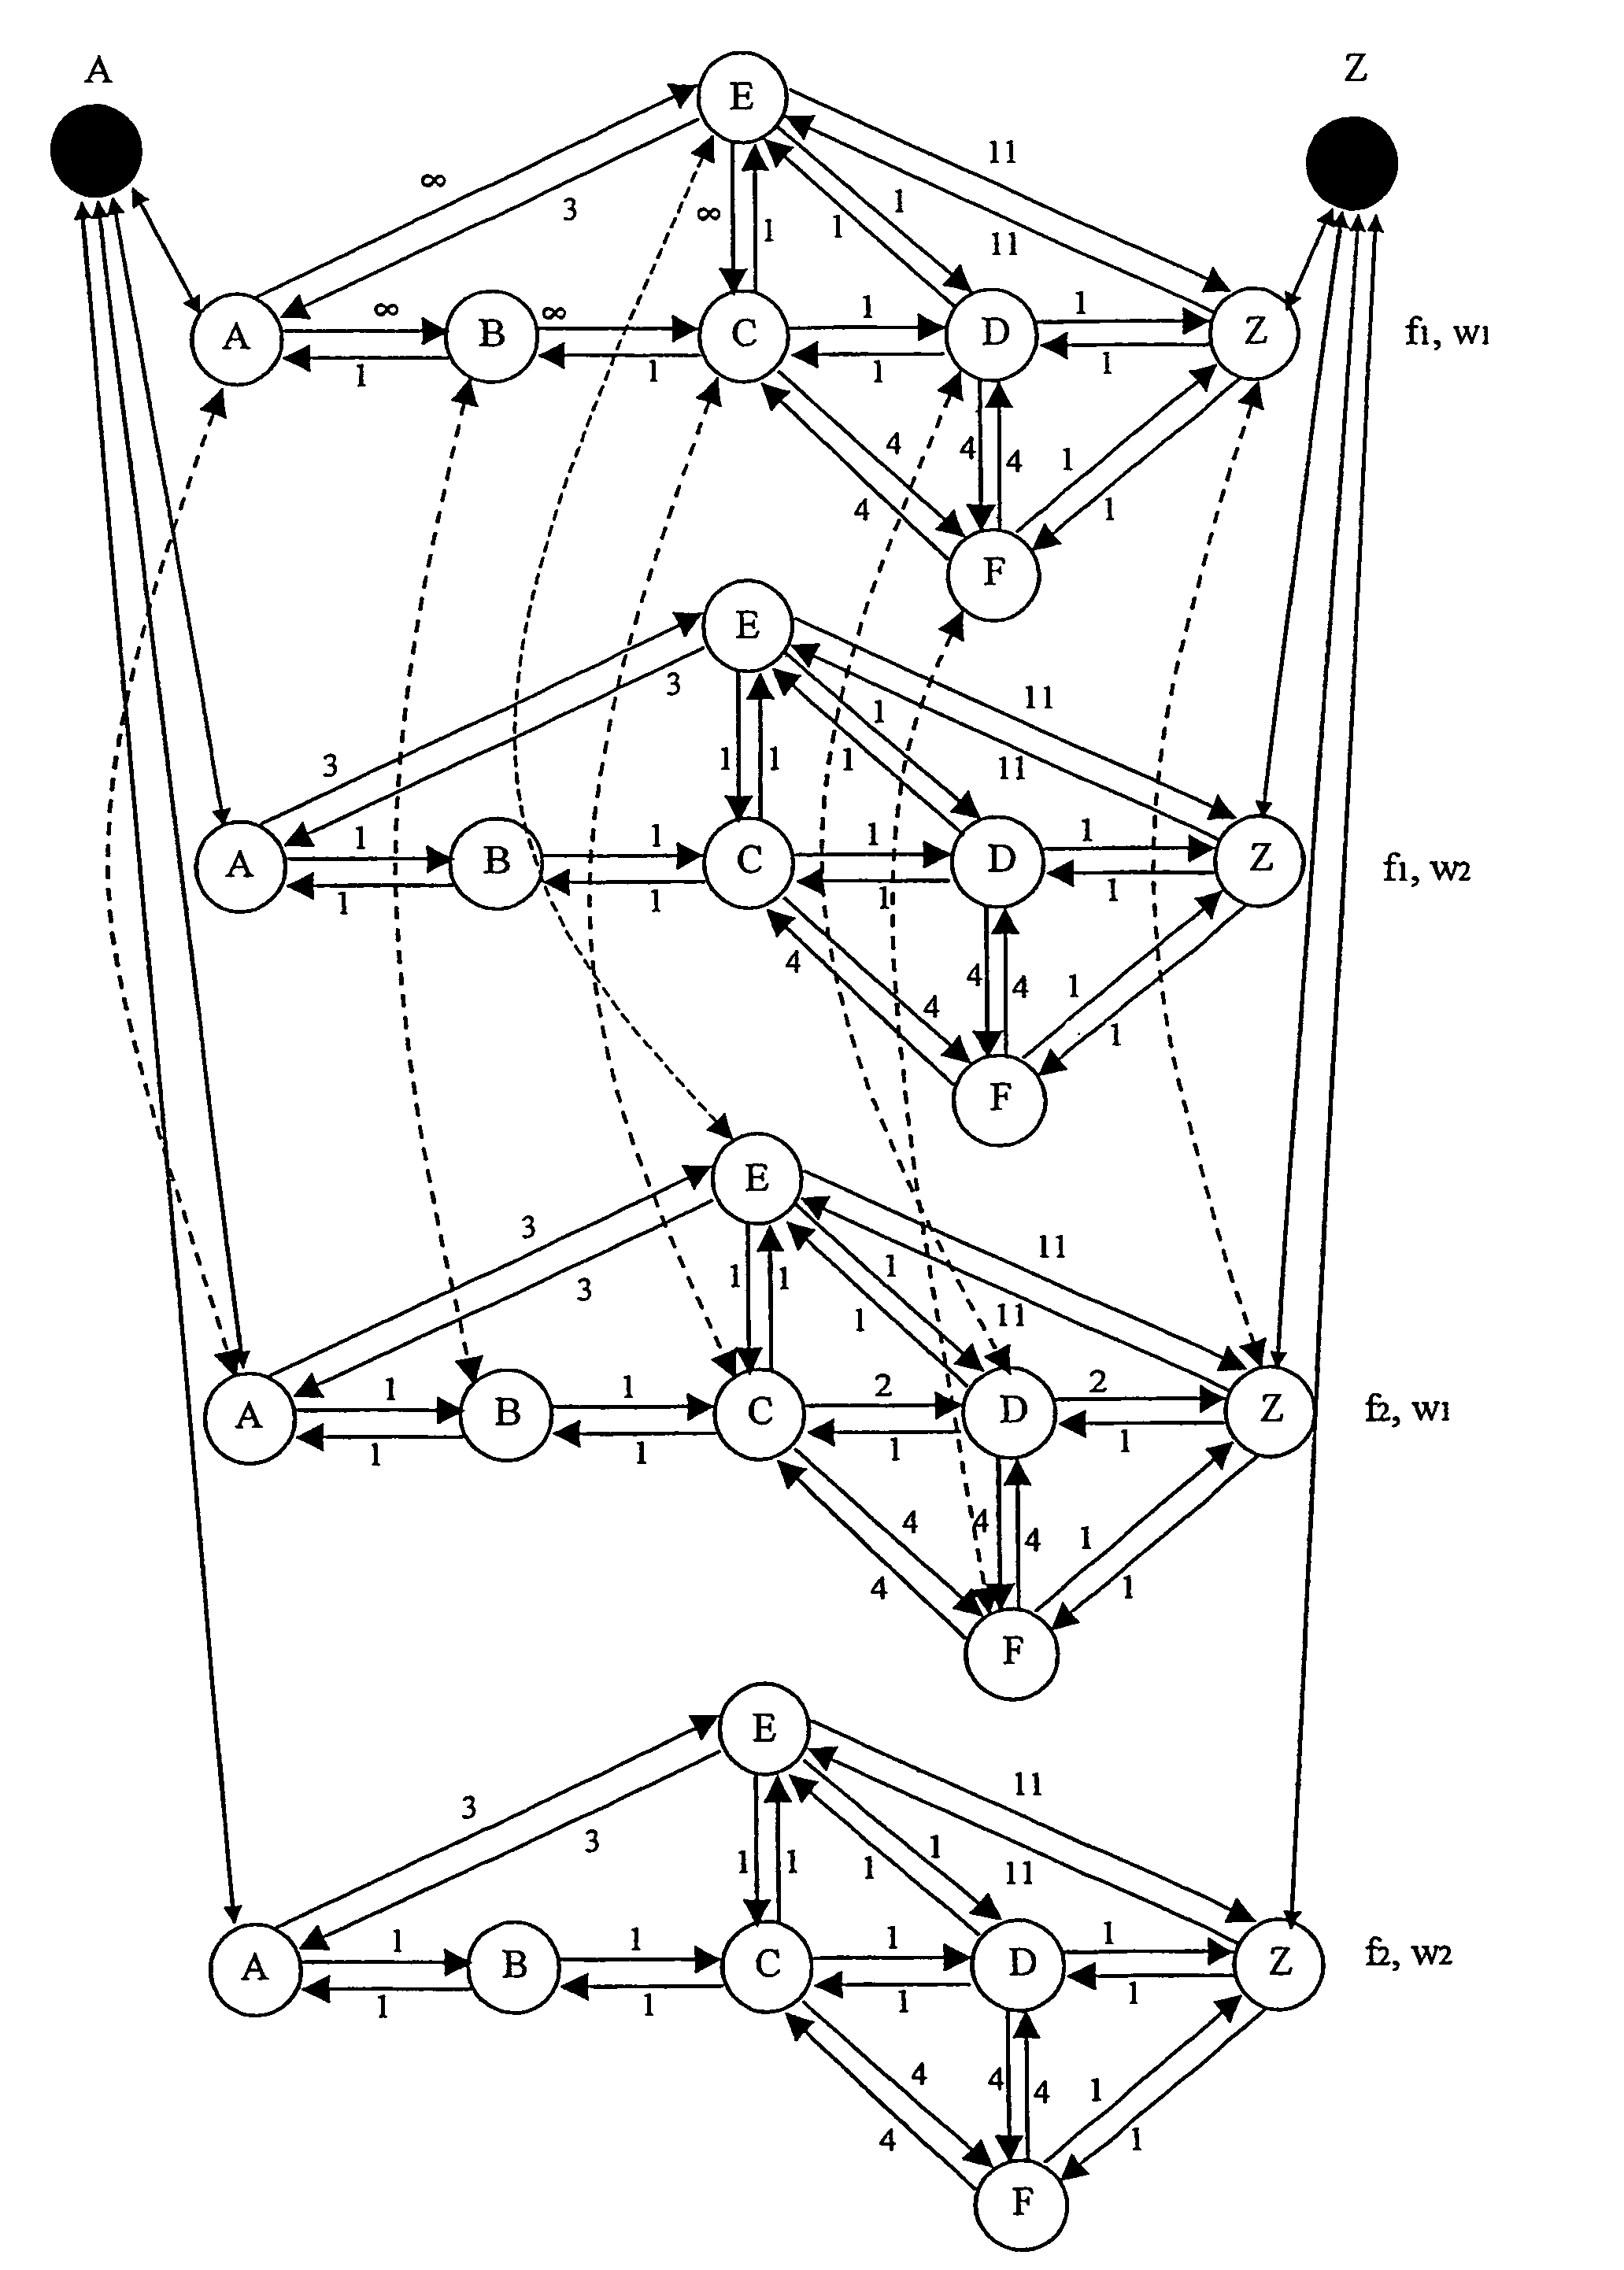 Method for planning or provisioning data transport networks